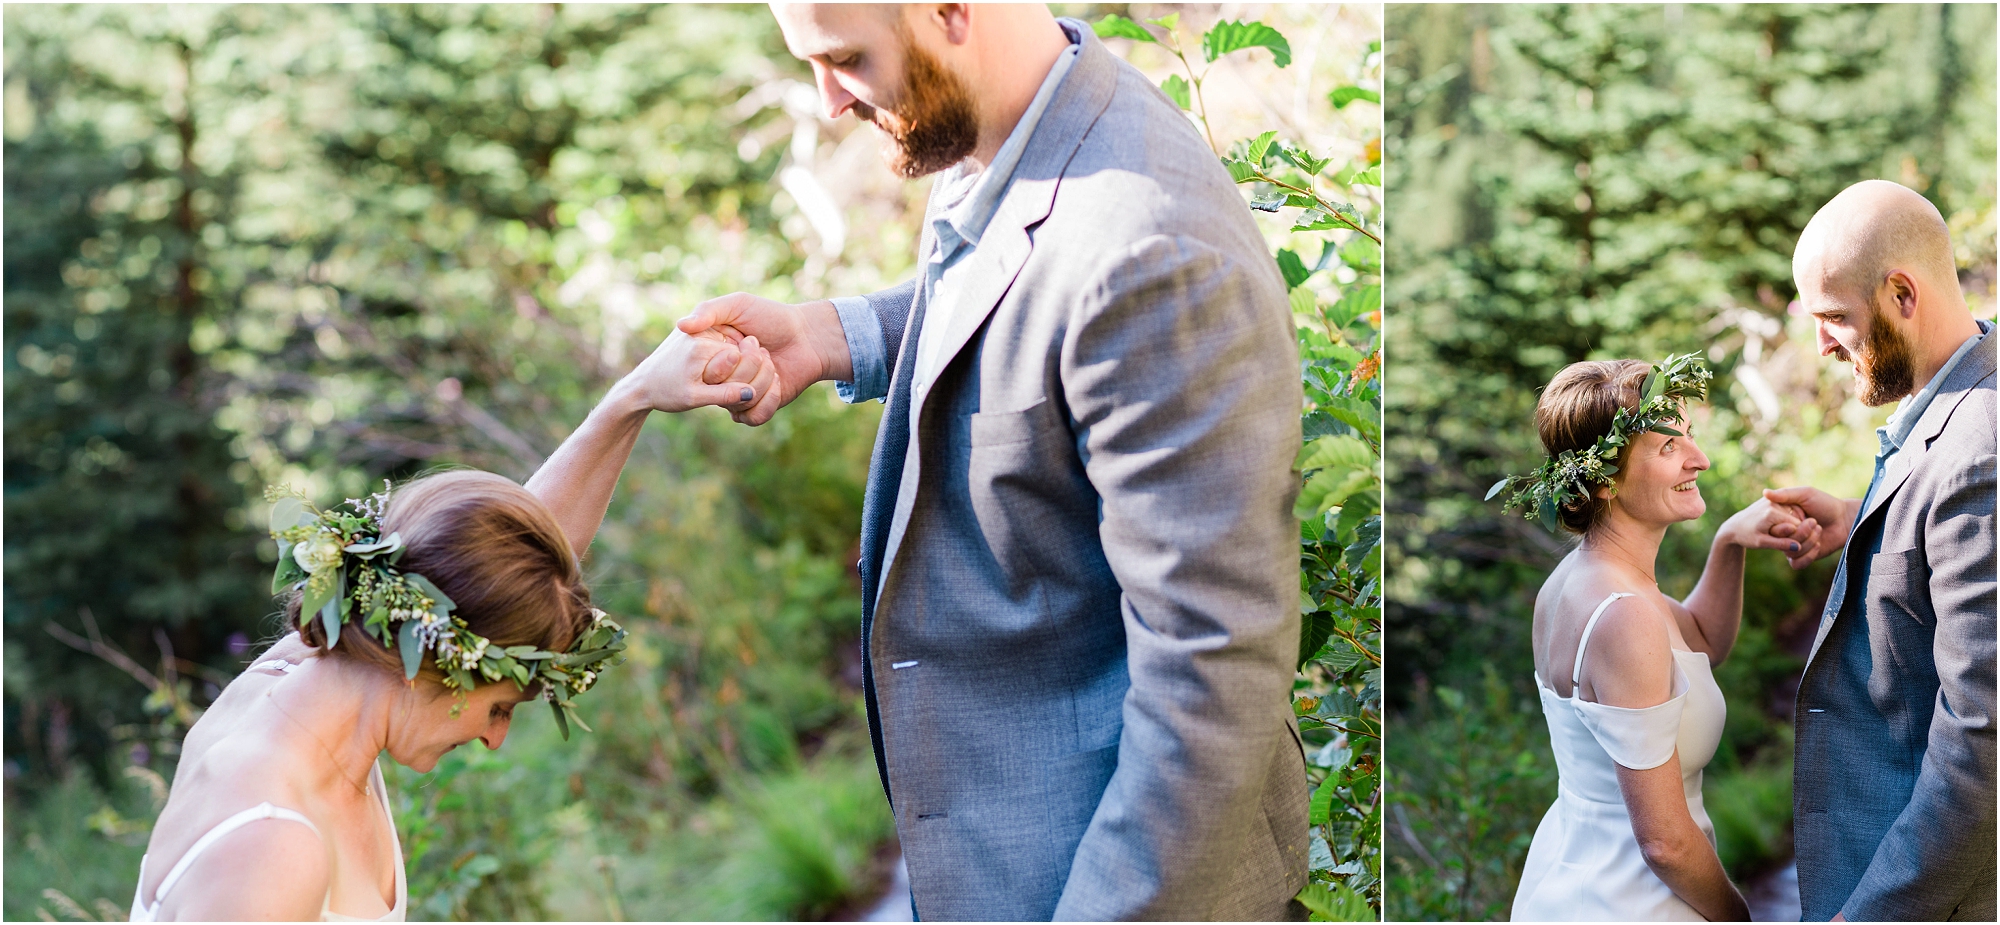 A bride looks adoringly into her groom's eyes as he takes her hand and helps her up the steep trail during their Oregon adventurous elopement at Tumalo Falls in Bend. | Erica Swantek Photography